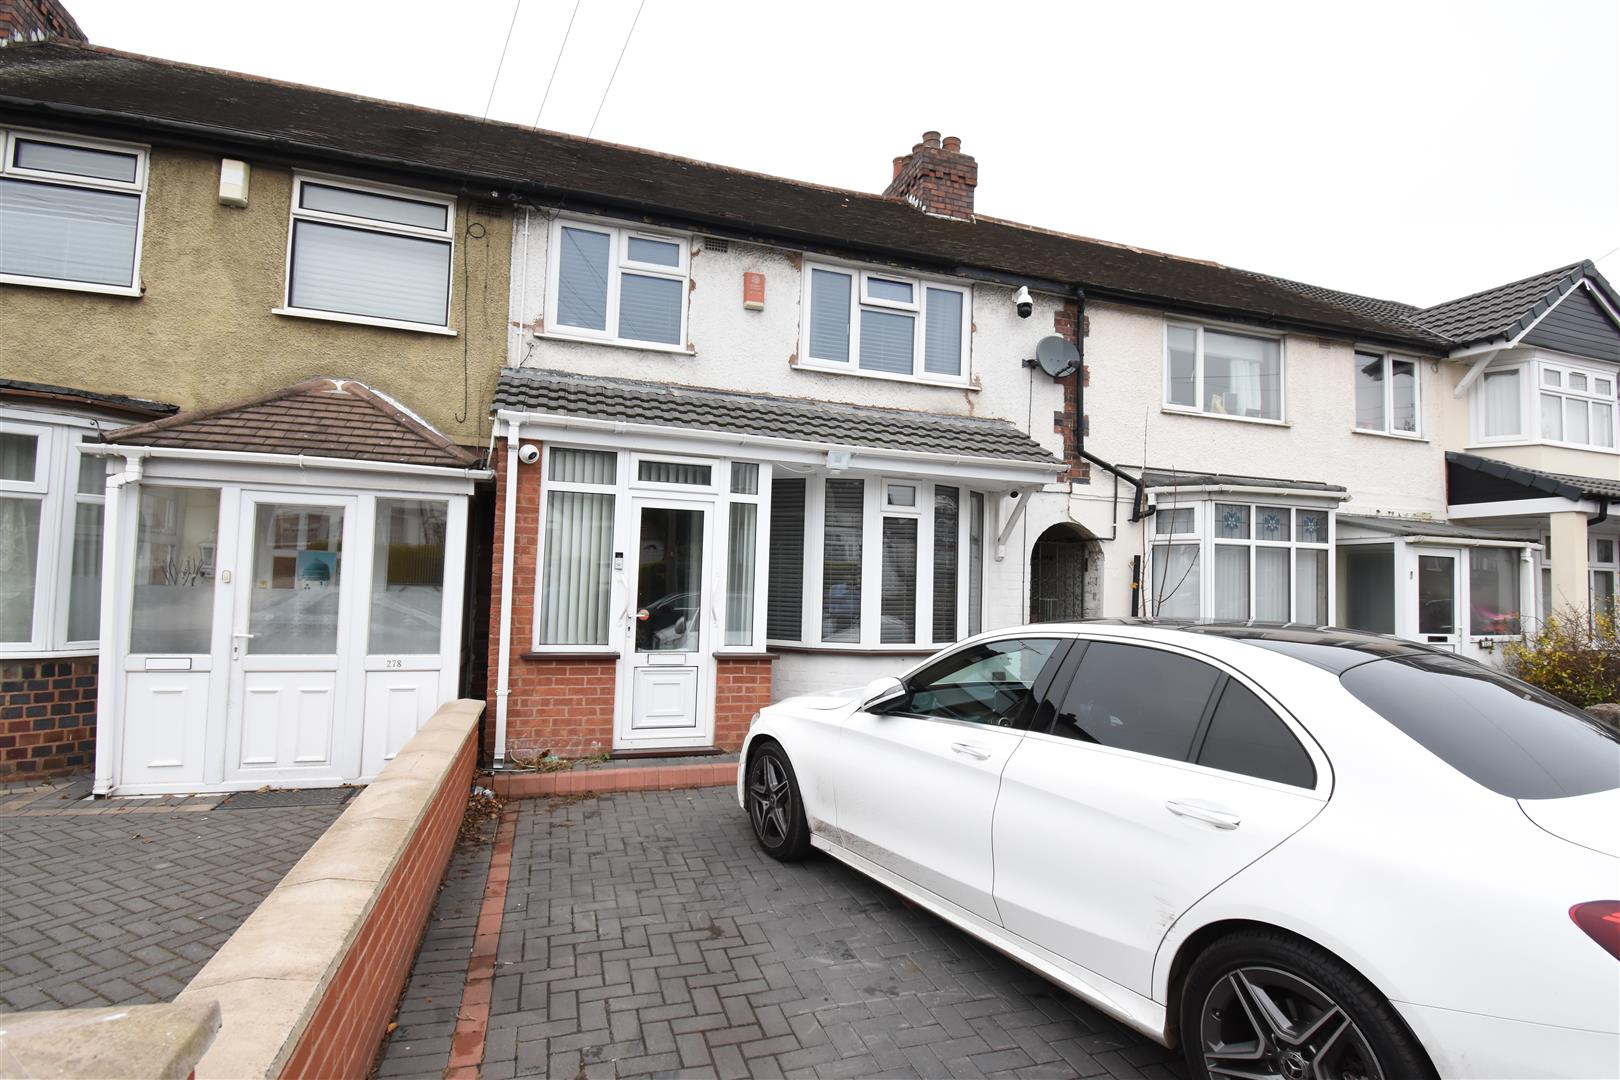 3 bed house for sale in St. Margarets Road, Ward End, Birmingham, B8